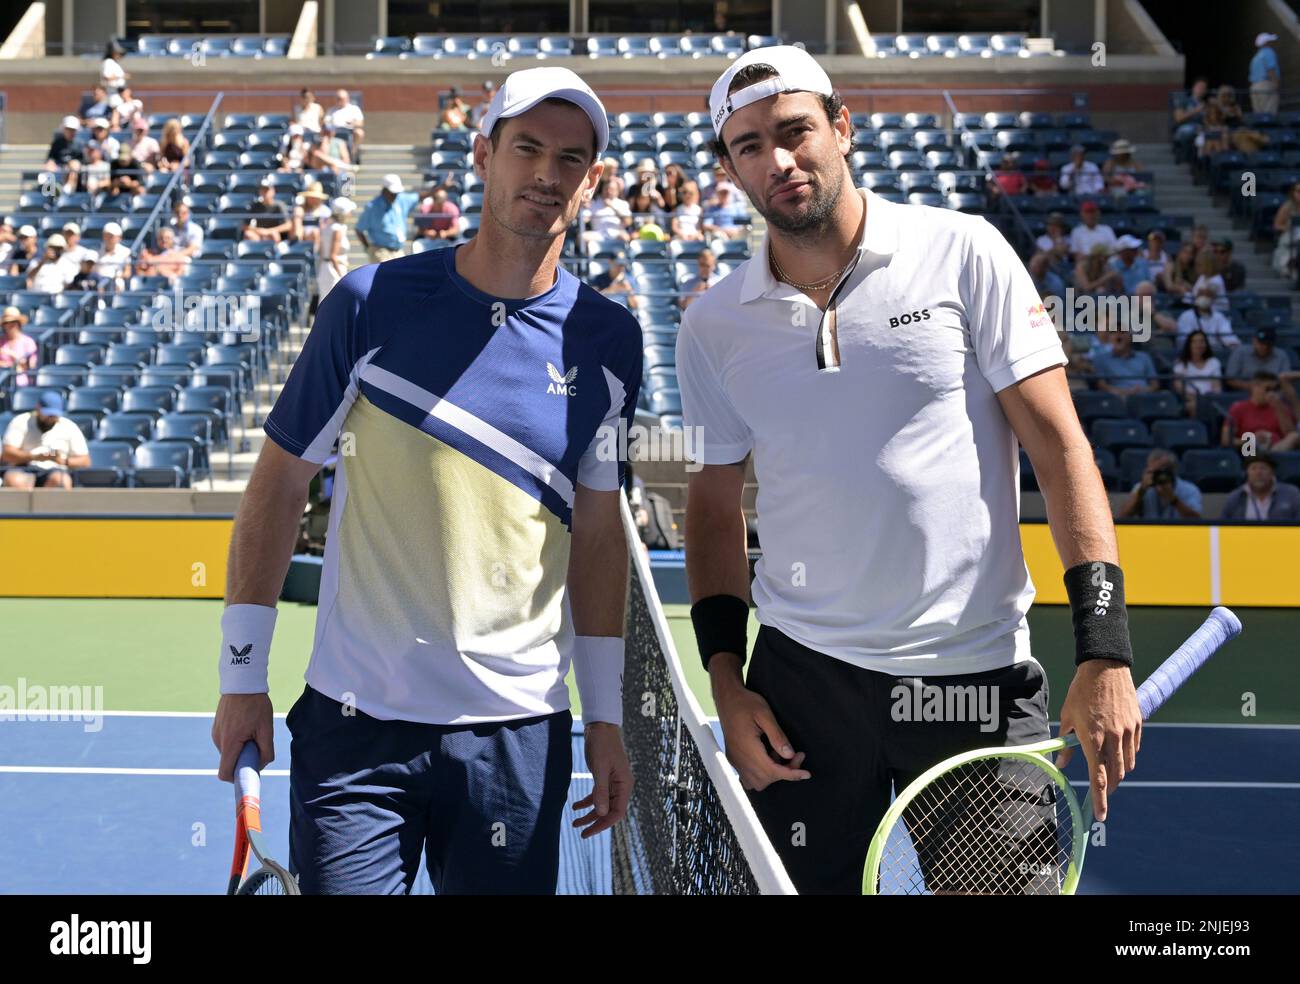 Andy Murray and Matteo Berrettini pose for a photo before a mens singles match at the 2022 US Open, Friday, Sep